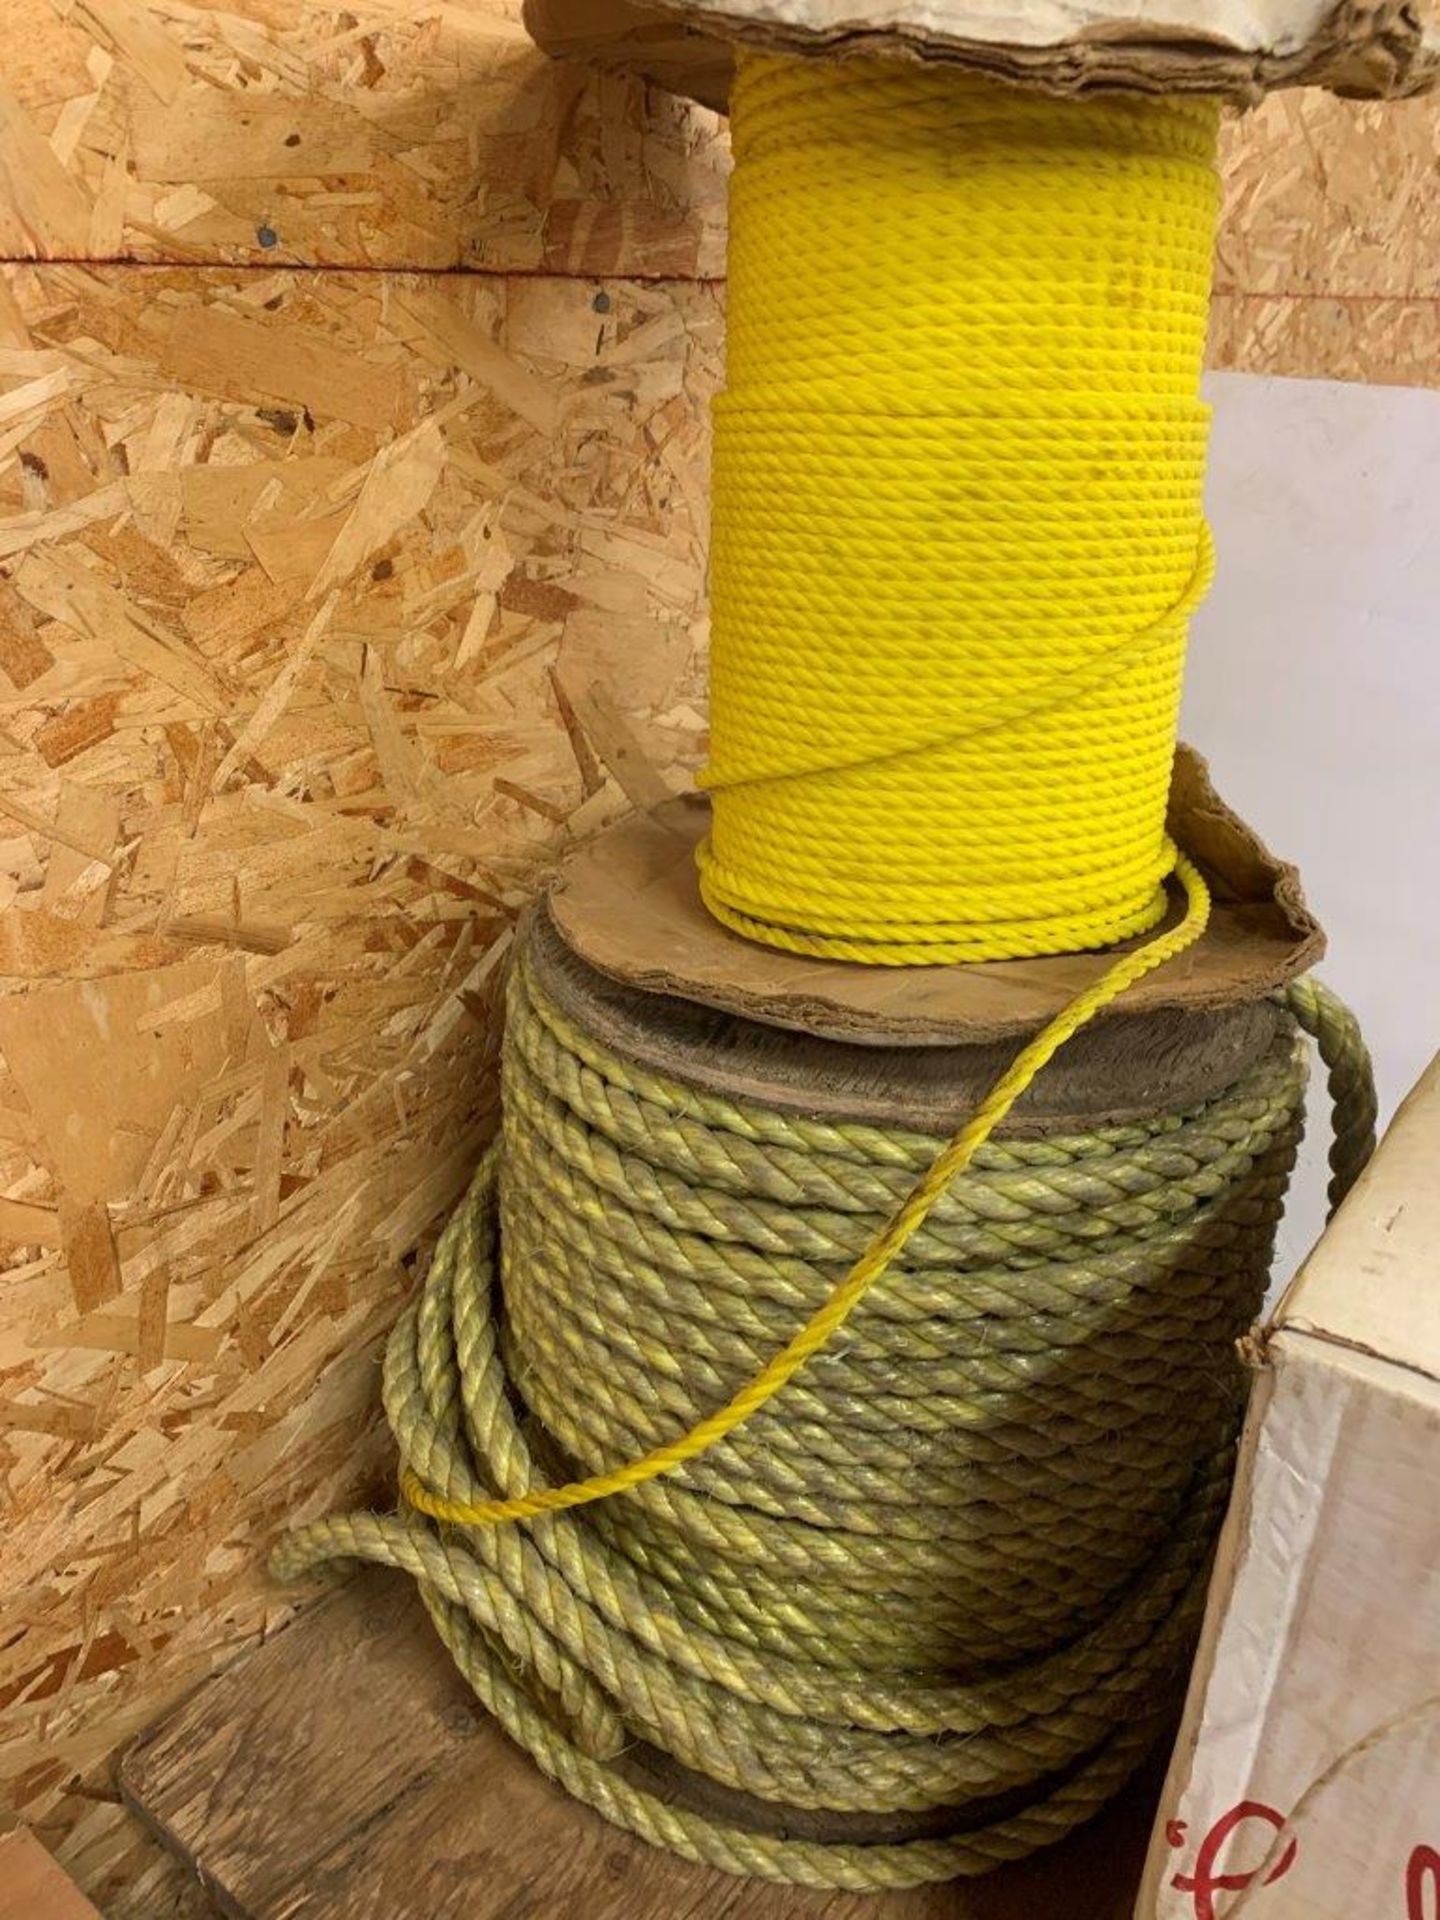 ROLL OF RADIANT PLASTIC TWINE AND ROLLS OF NYLON ROPE - Image 3 of 3